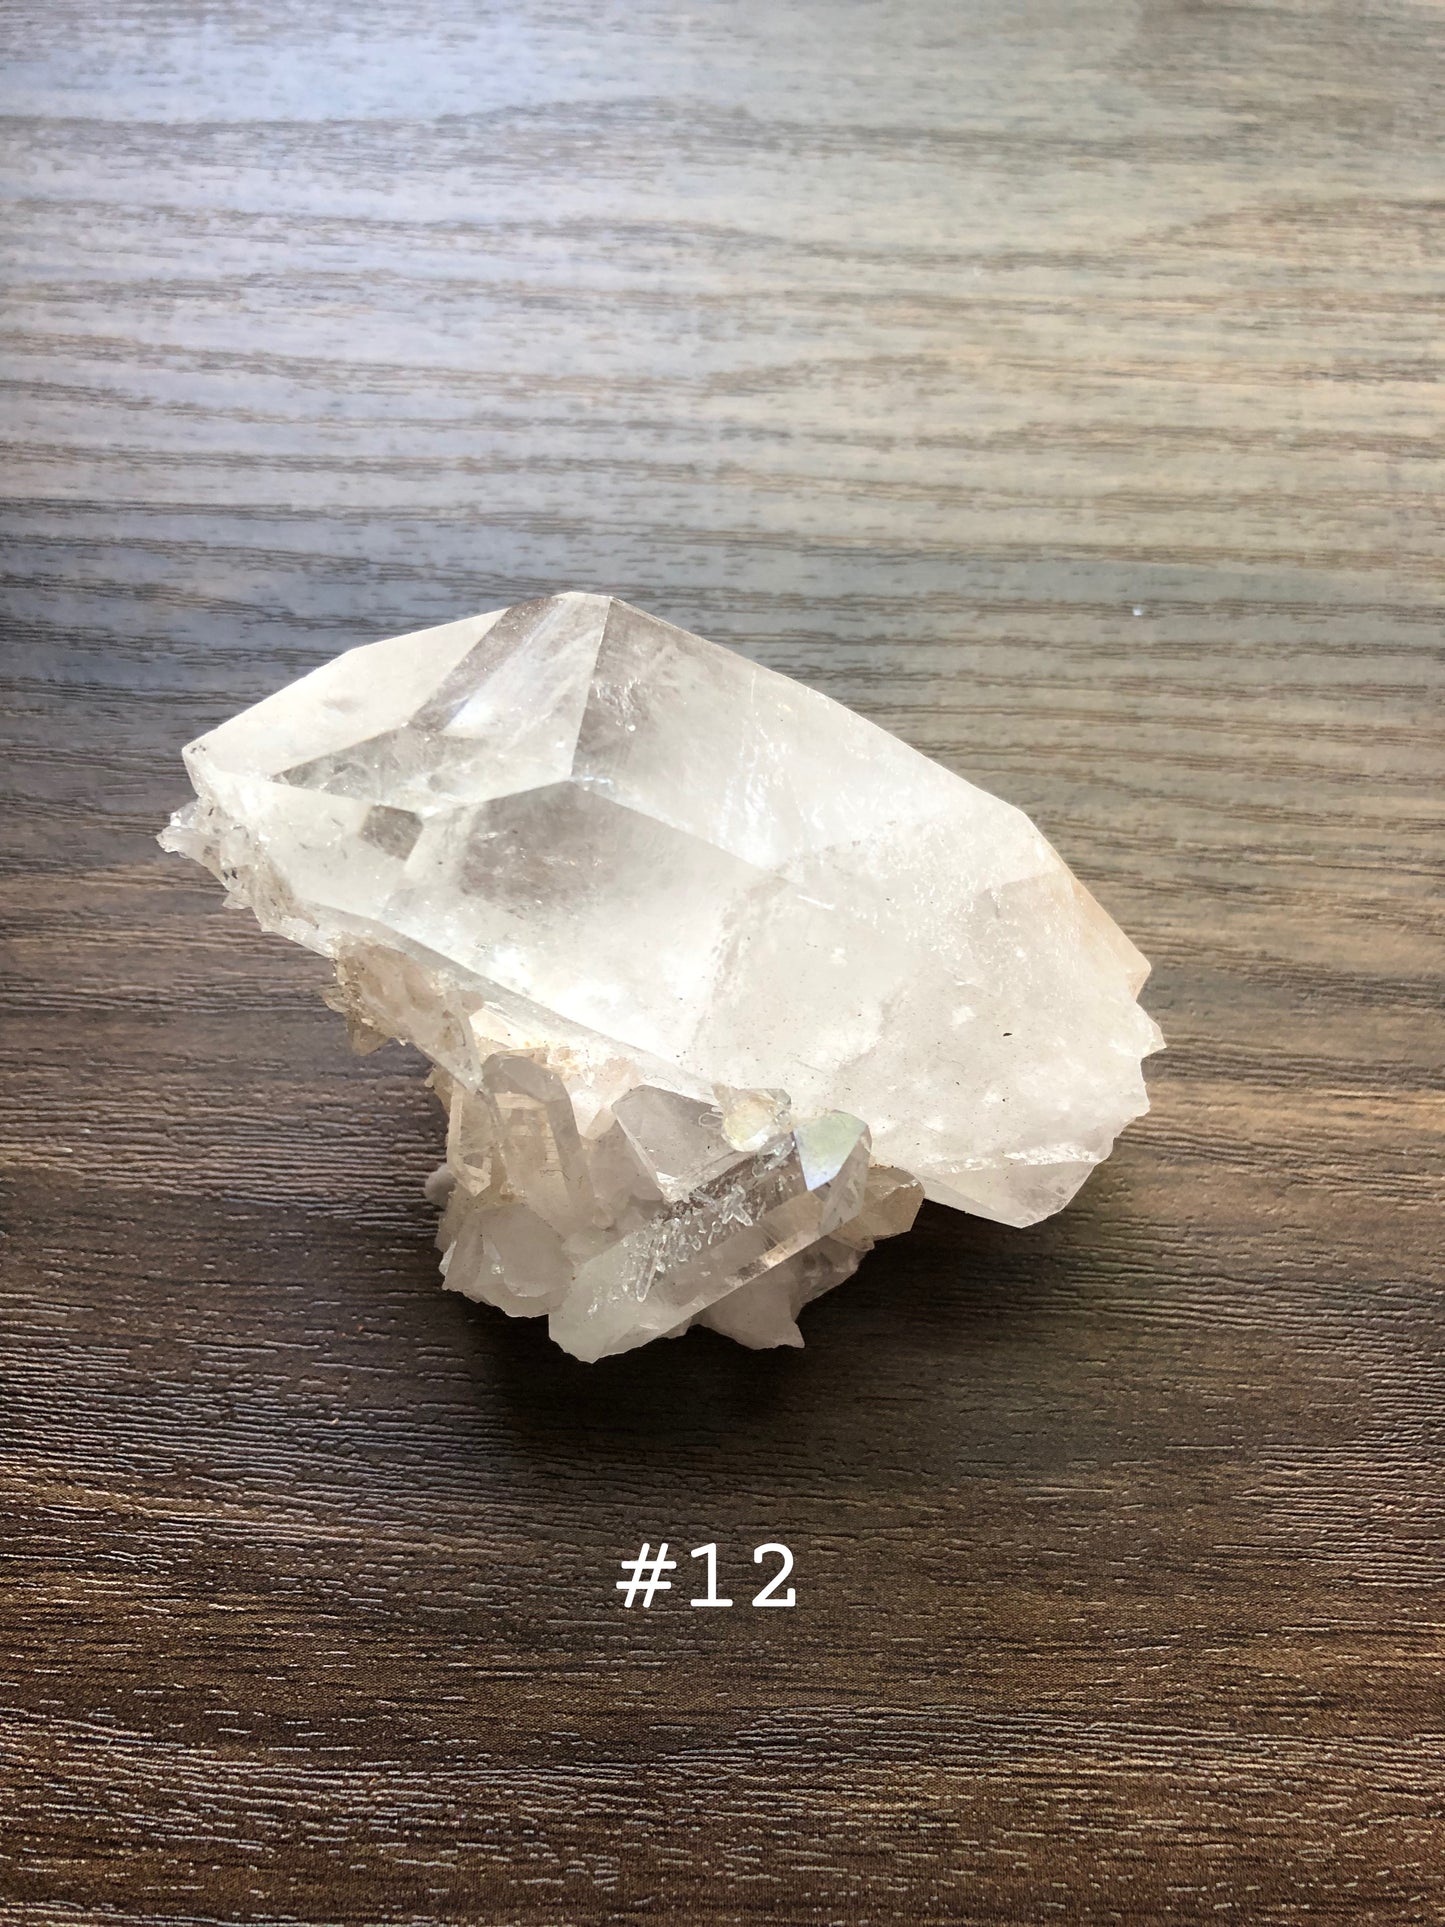 A large, rough cut quartz crystal rests on a wooden surface. It is jagged, with small clusters on it. The crystal is relatively clear. The number 12 is shown on the picture.